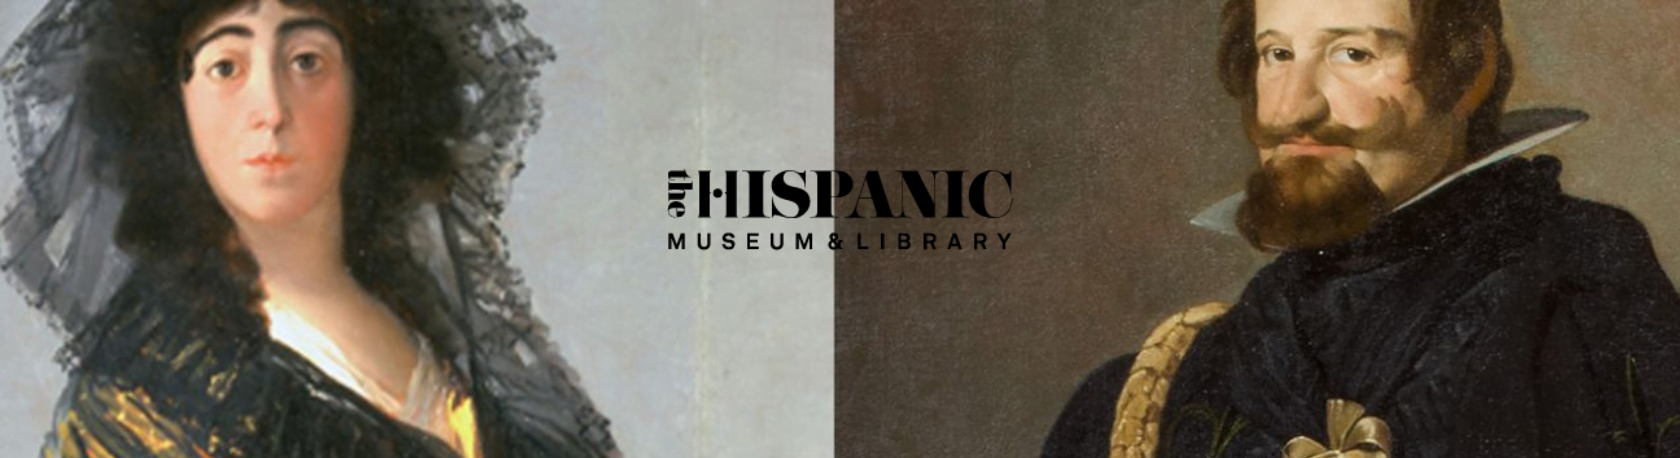 Live the Spanish Language: Guided Art Tour & Lecture at The Hispanic Society of America + Dominican Food - Speak Spanish - Learn Spanish - Easy Español